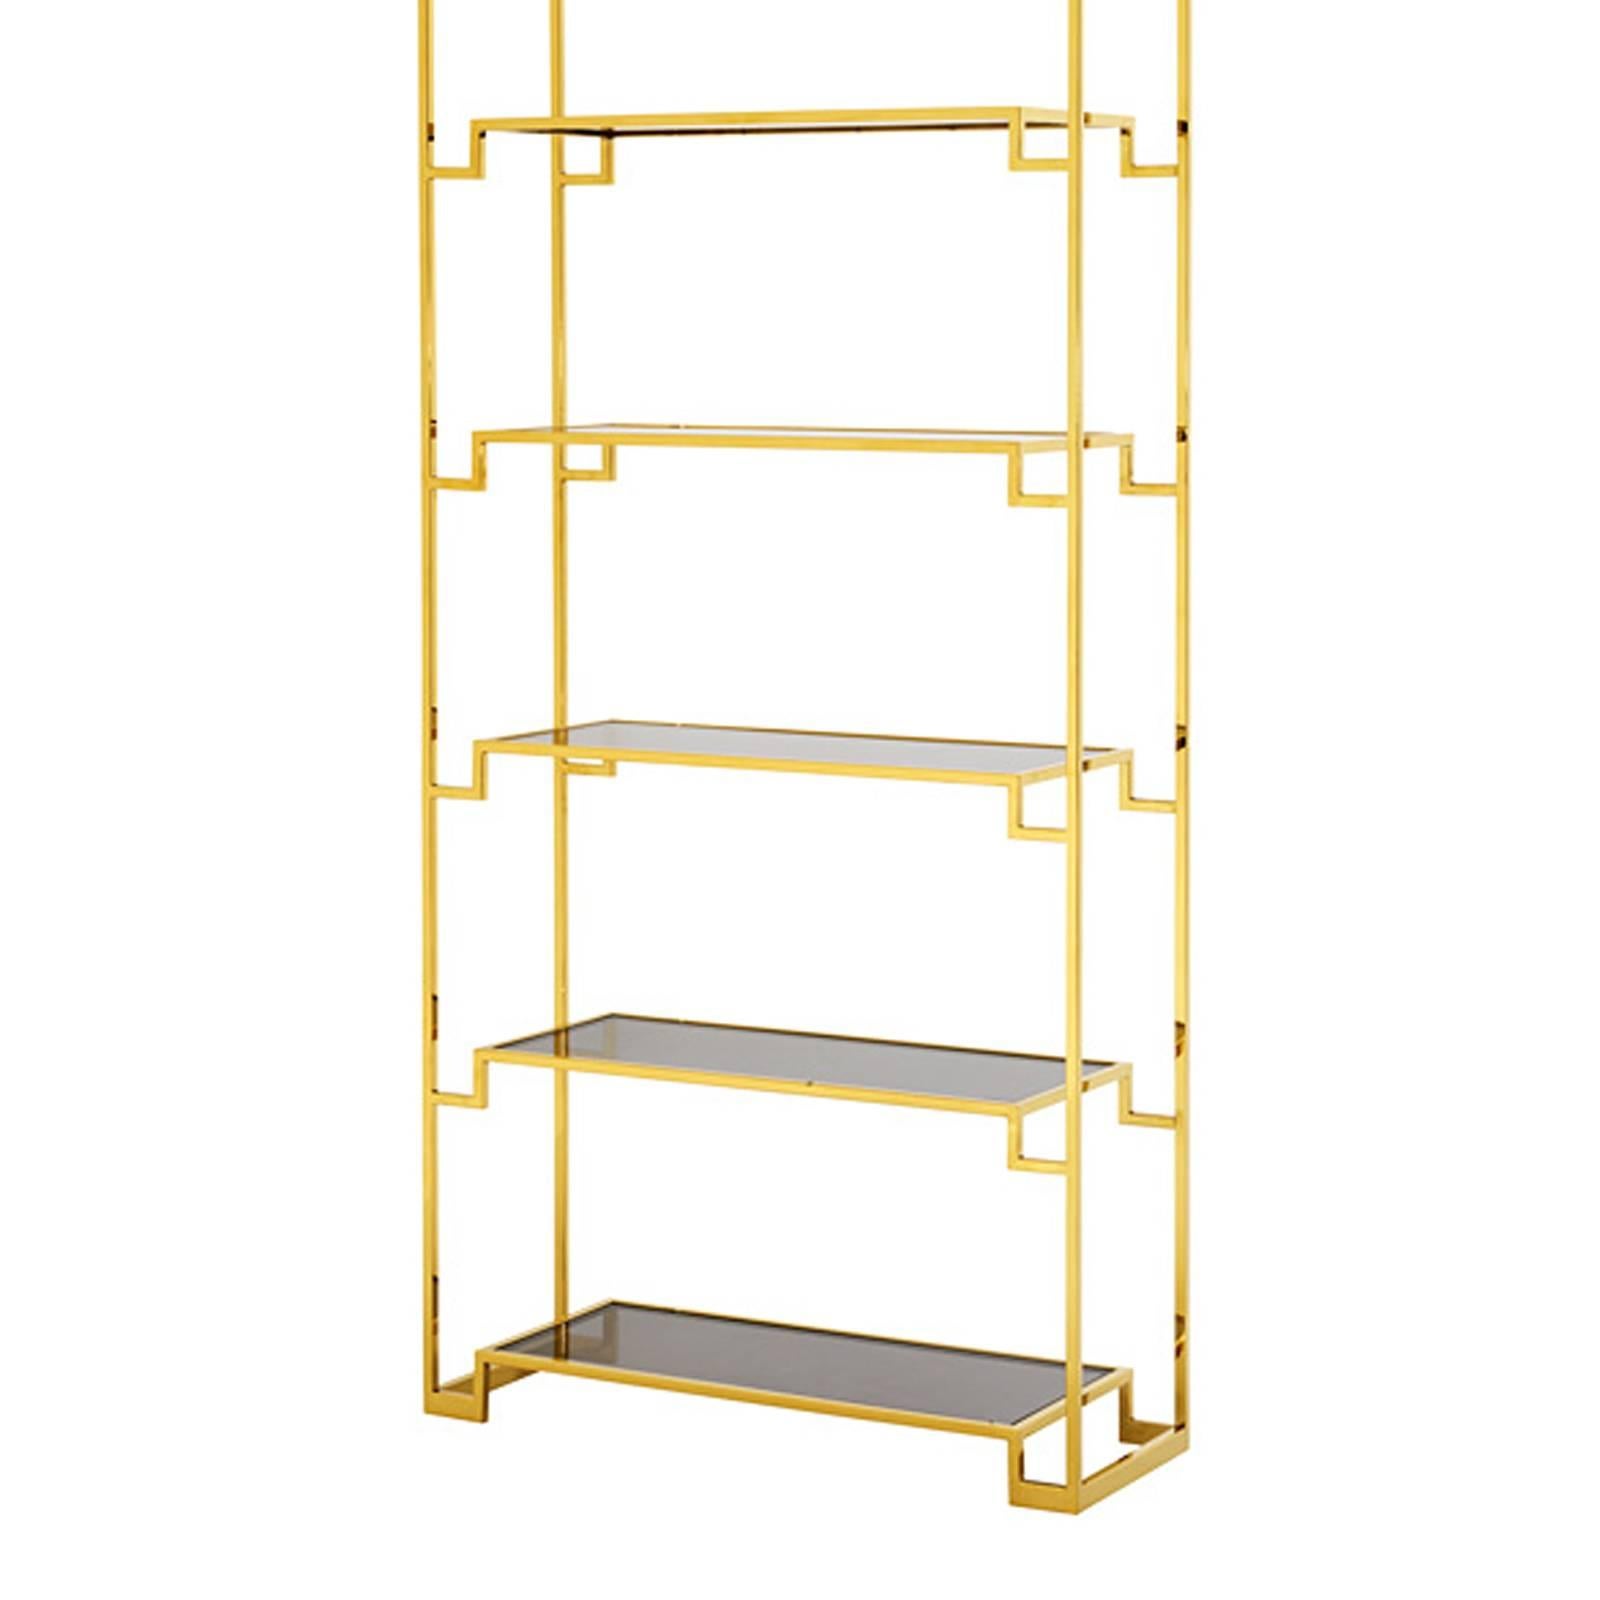 Dutch Stantord Bookshelves in Gold Finish with Smoked Glass